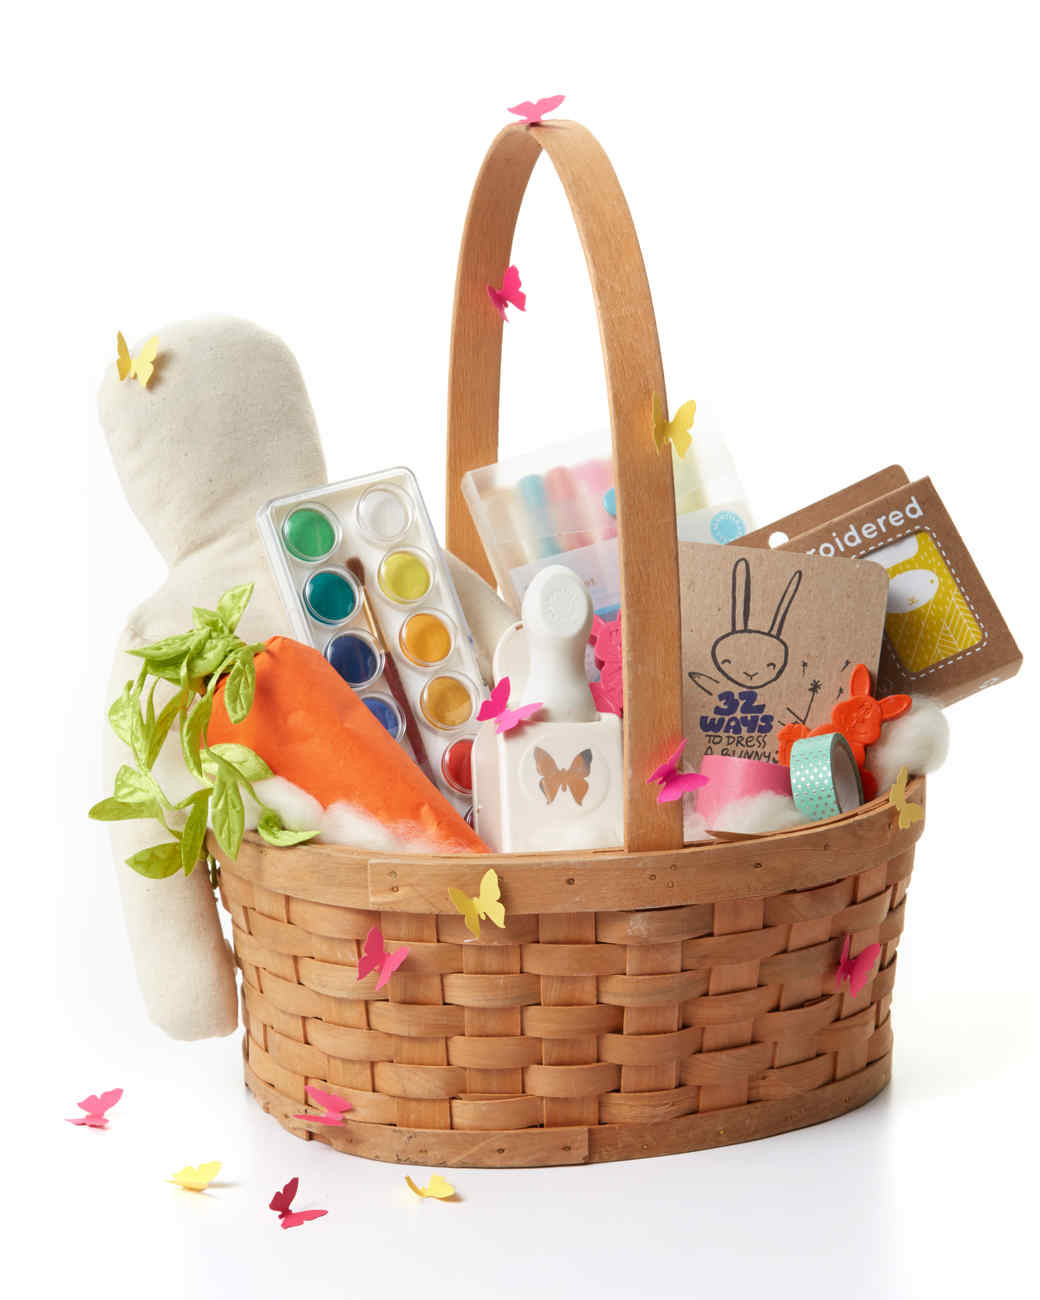 Gifts For Easter
 21 of Our Best Easter Basket Ideas